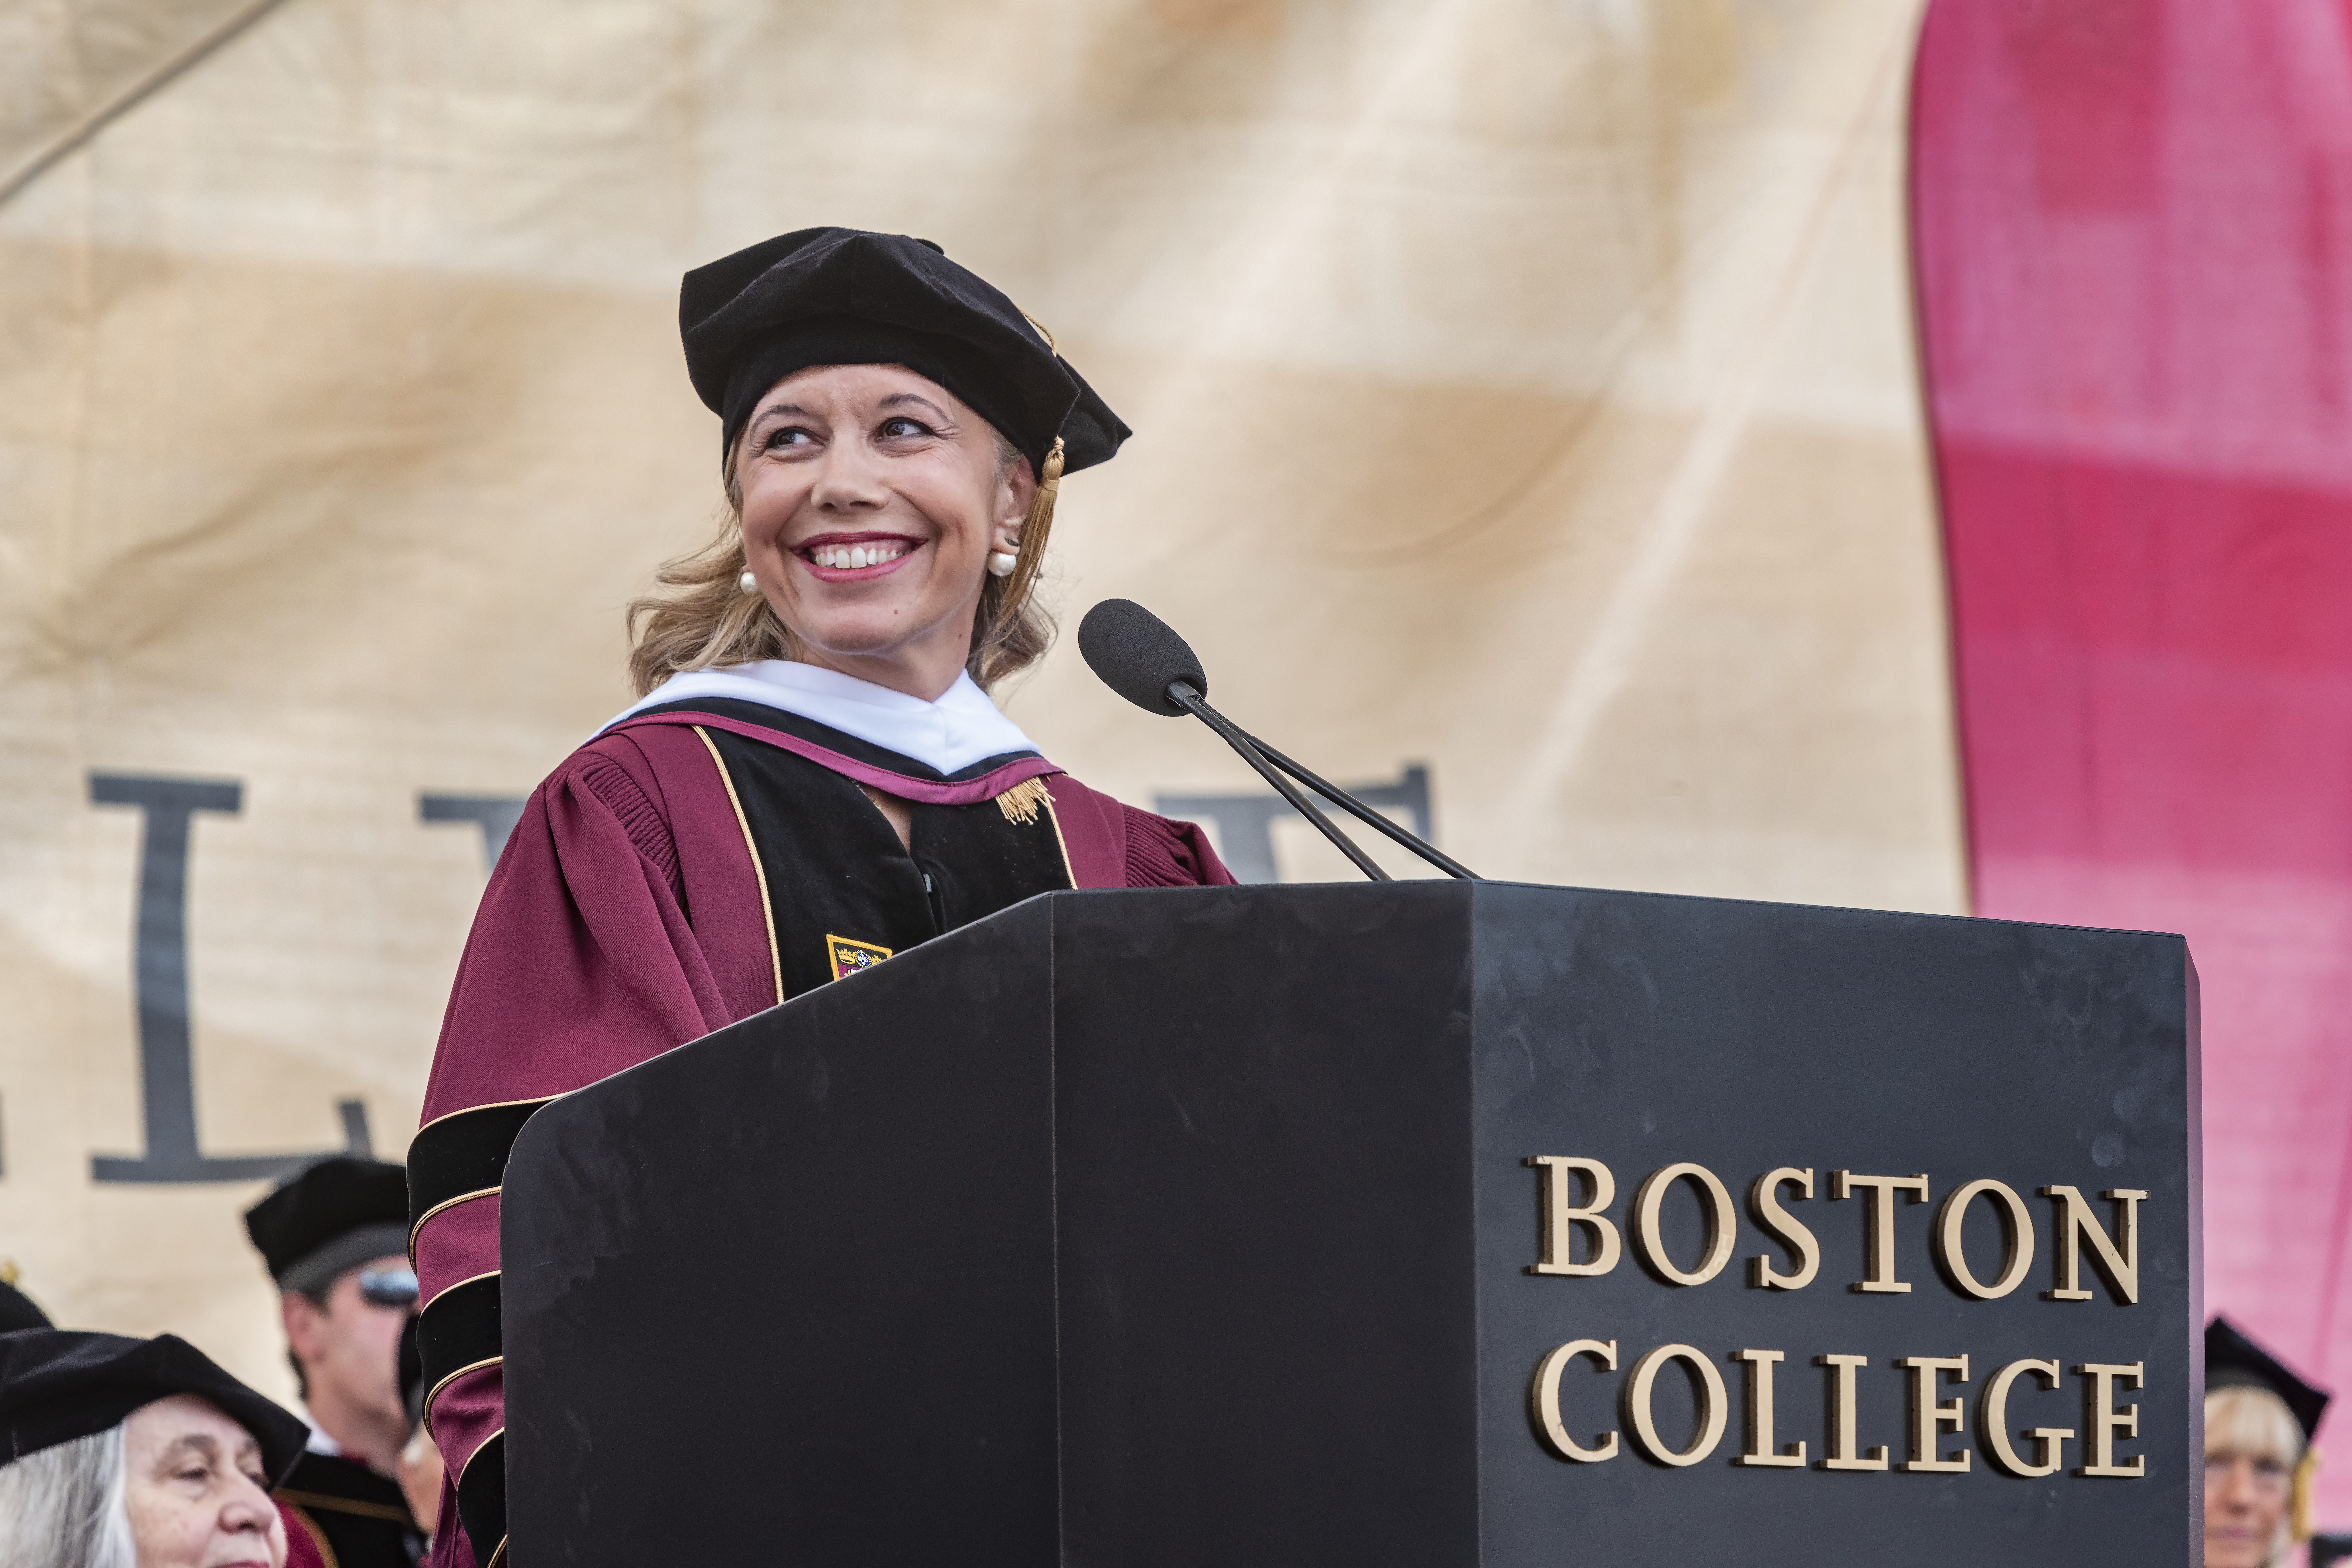 Boston College: From graduate students to tomorrow’s global changemakers